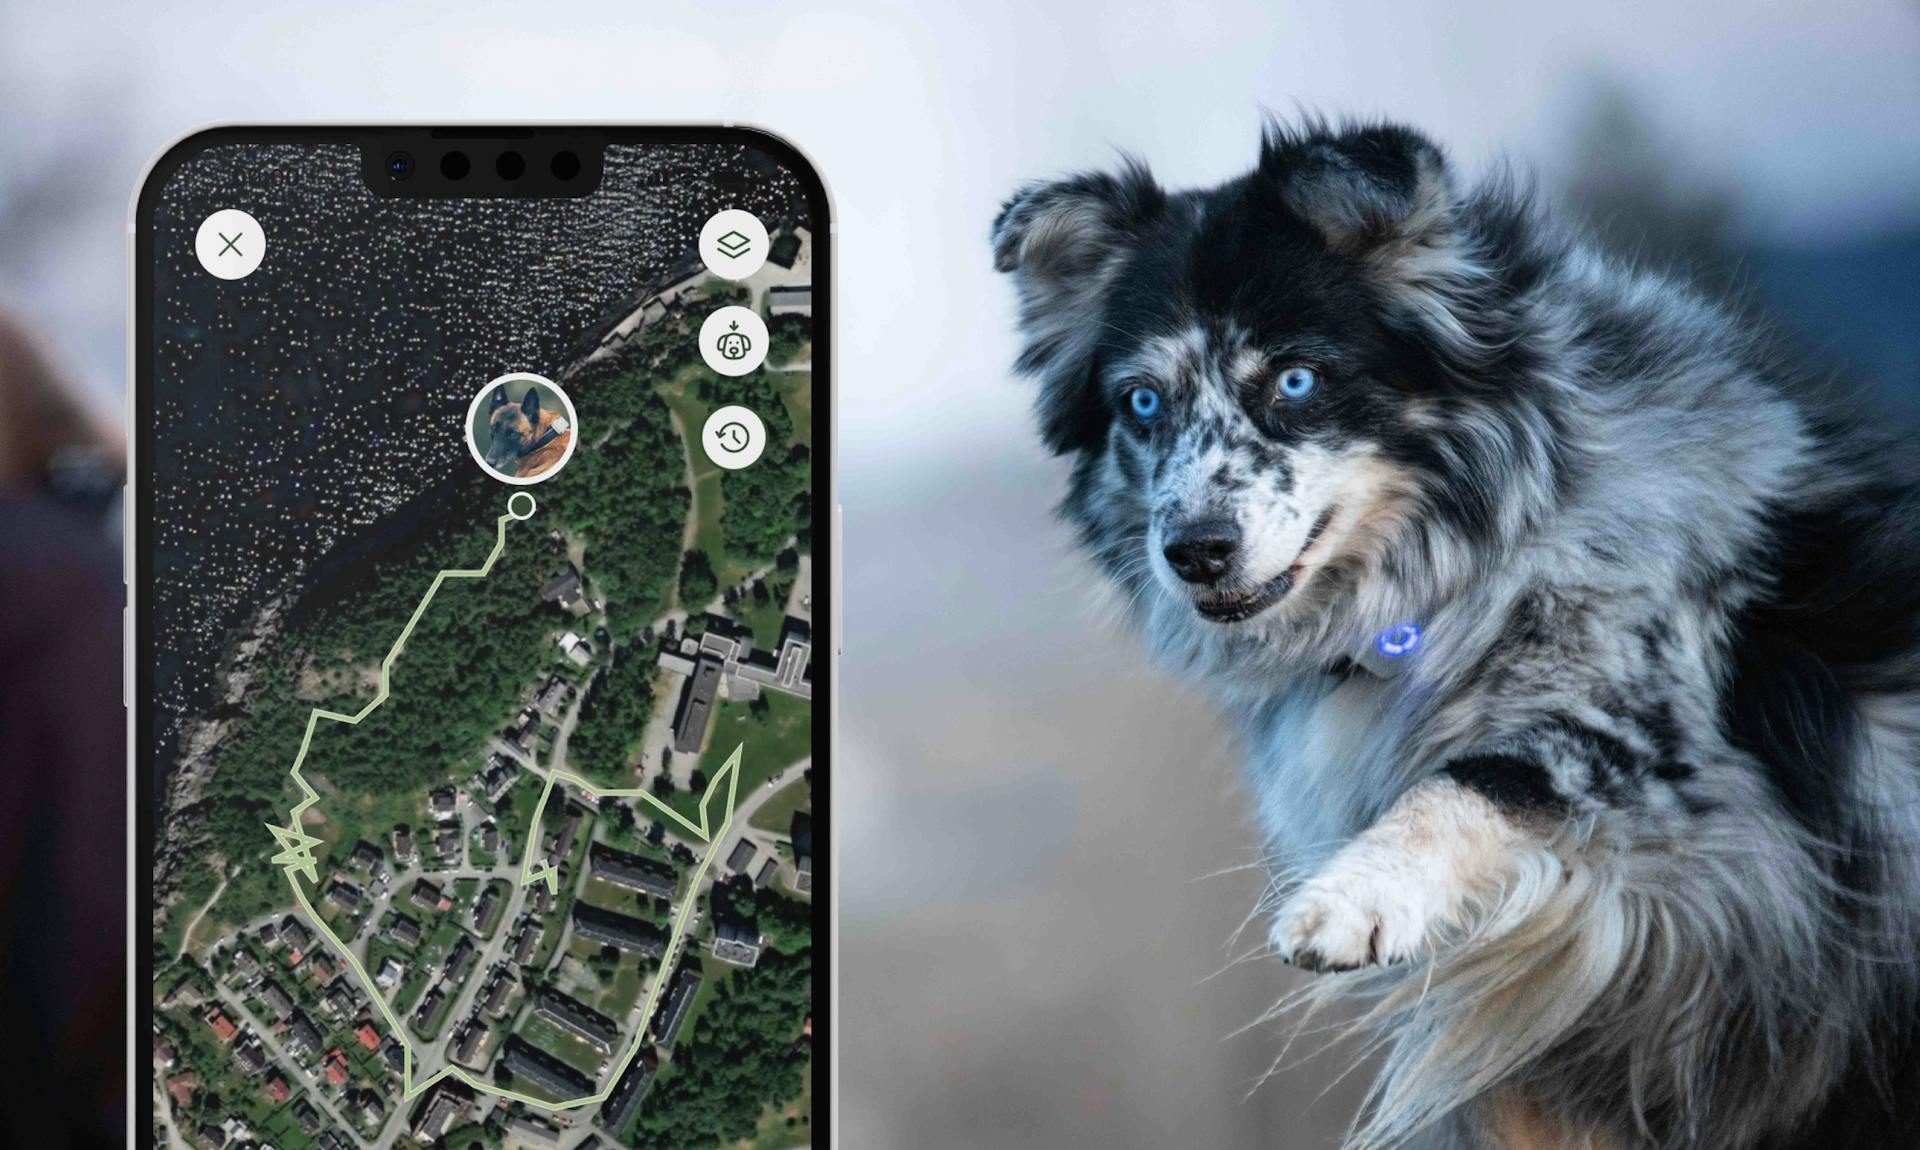 Location history GPS for dogs